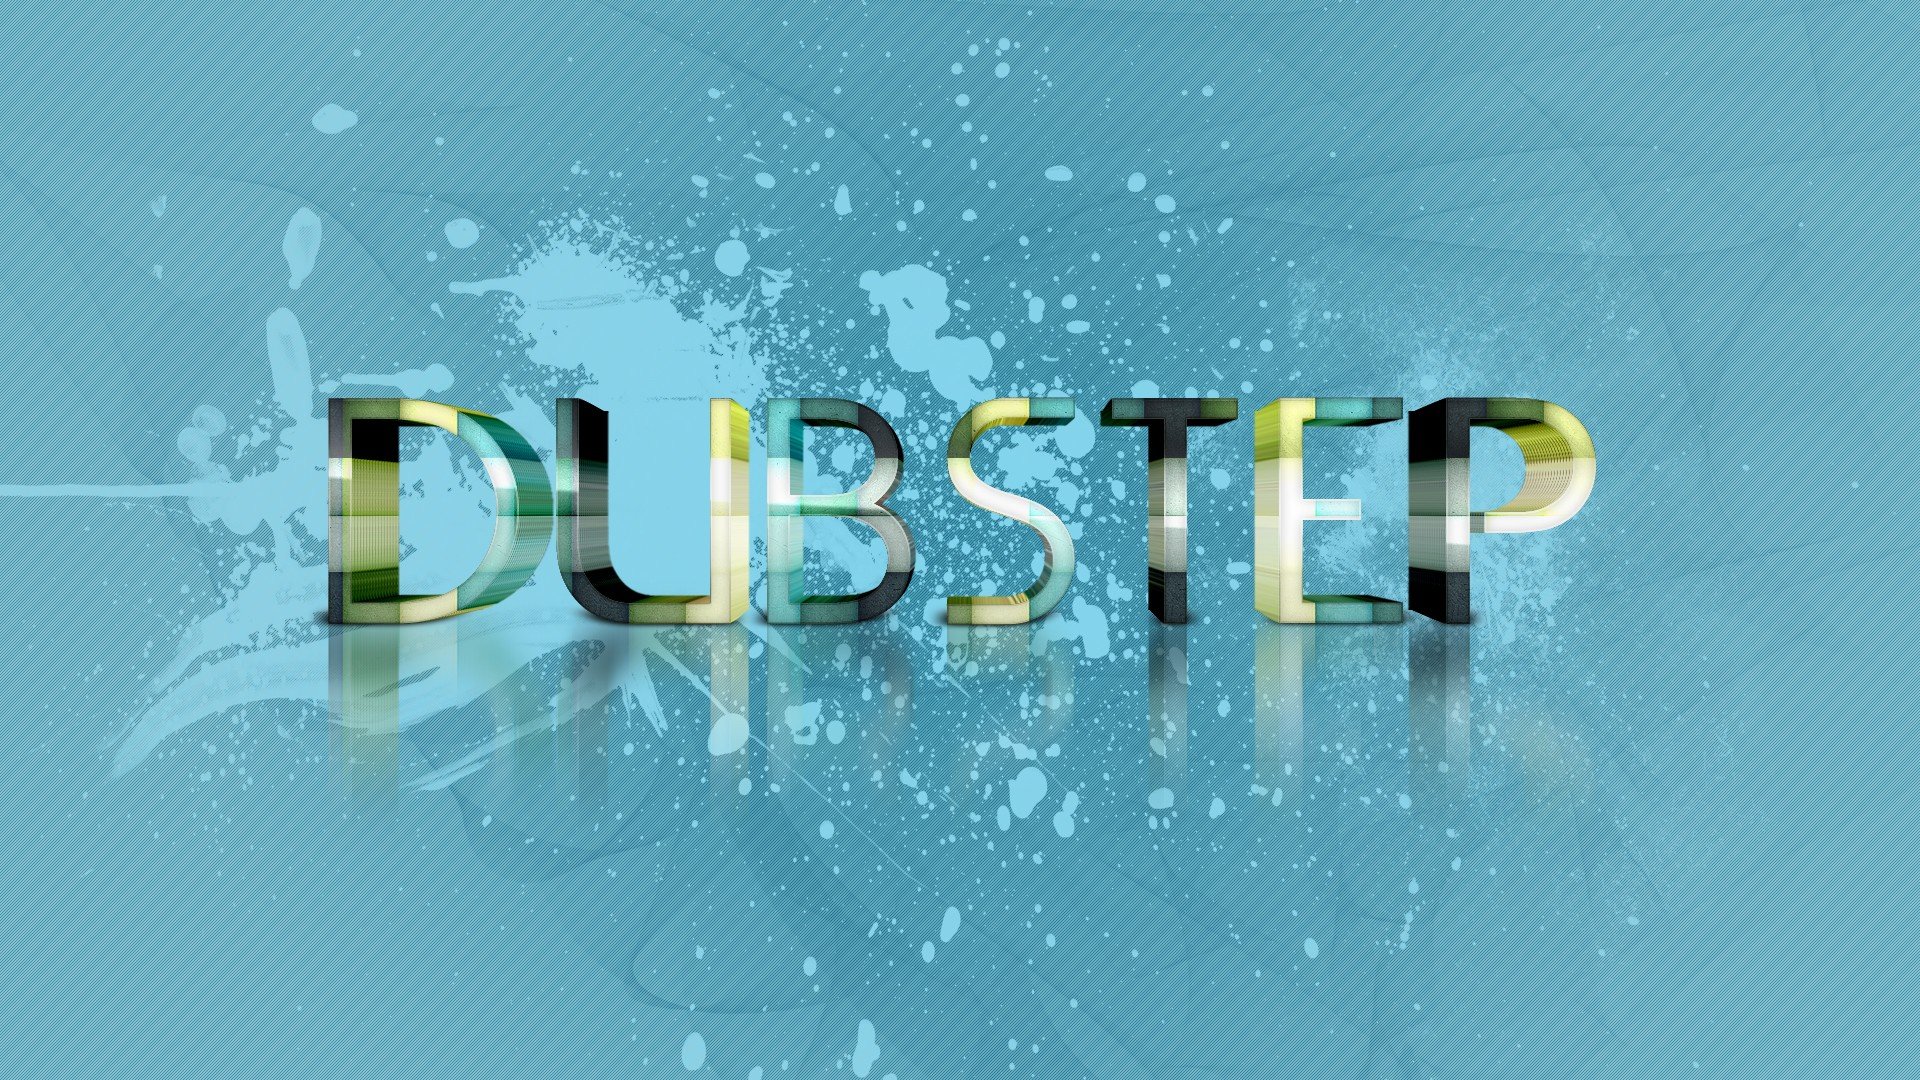 Download 1080p Dubstep computer wallpaper ID:11174 for free